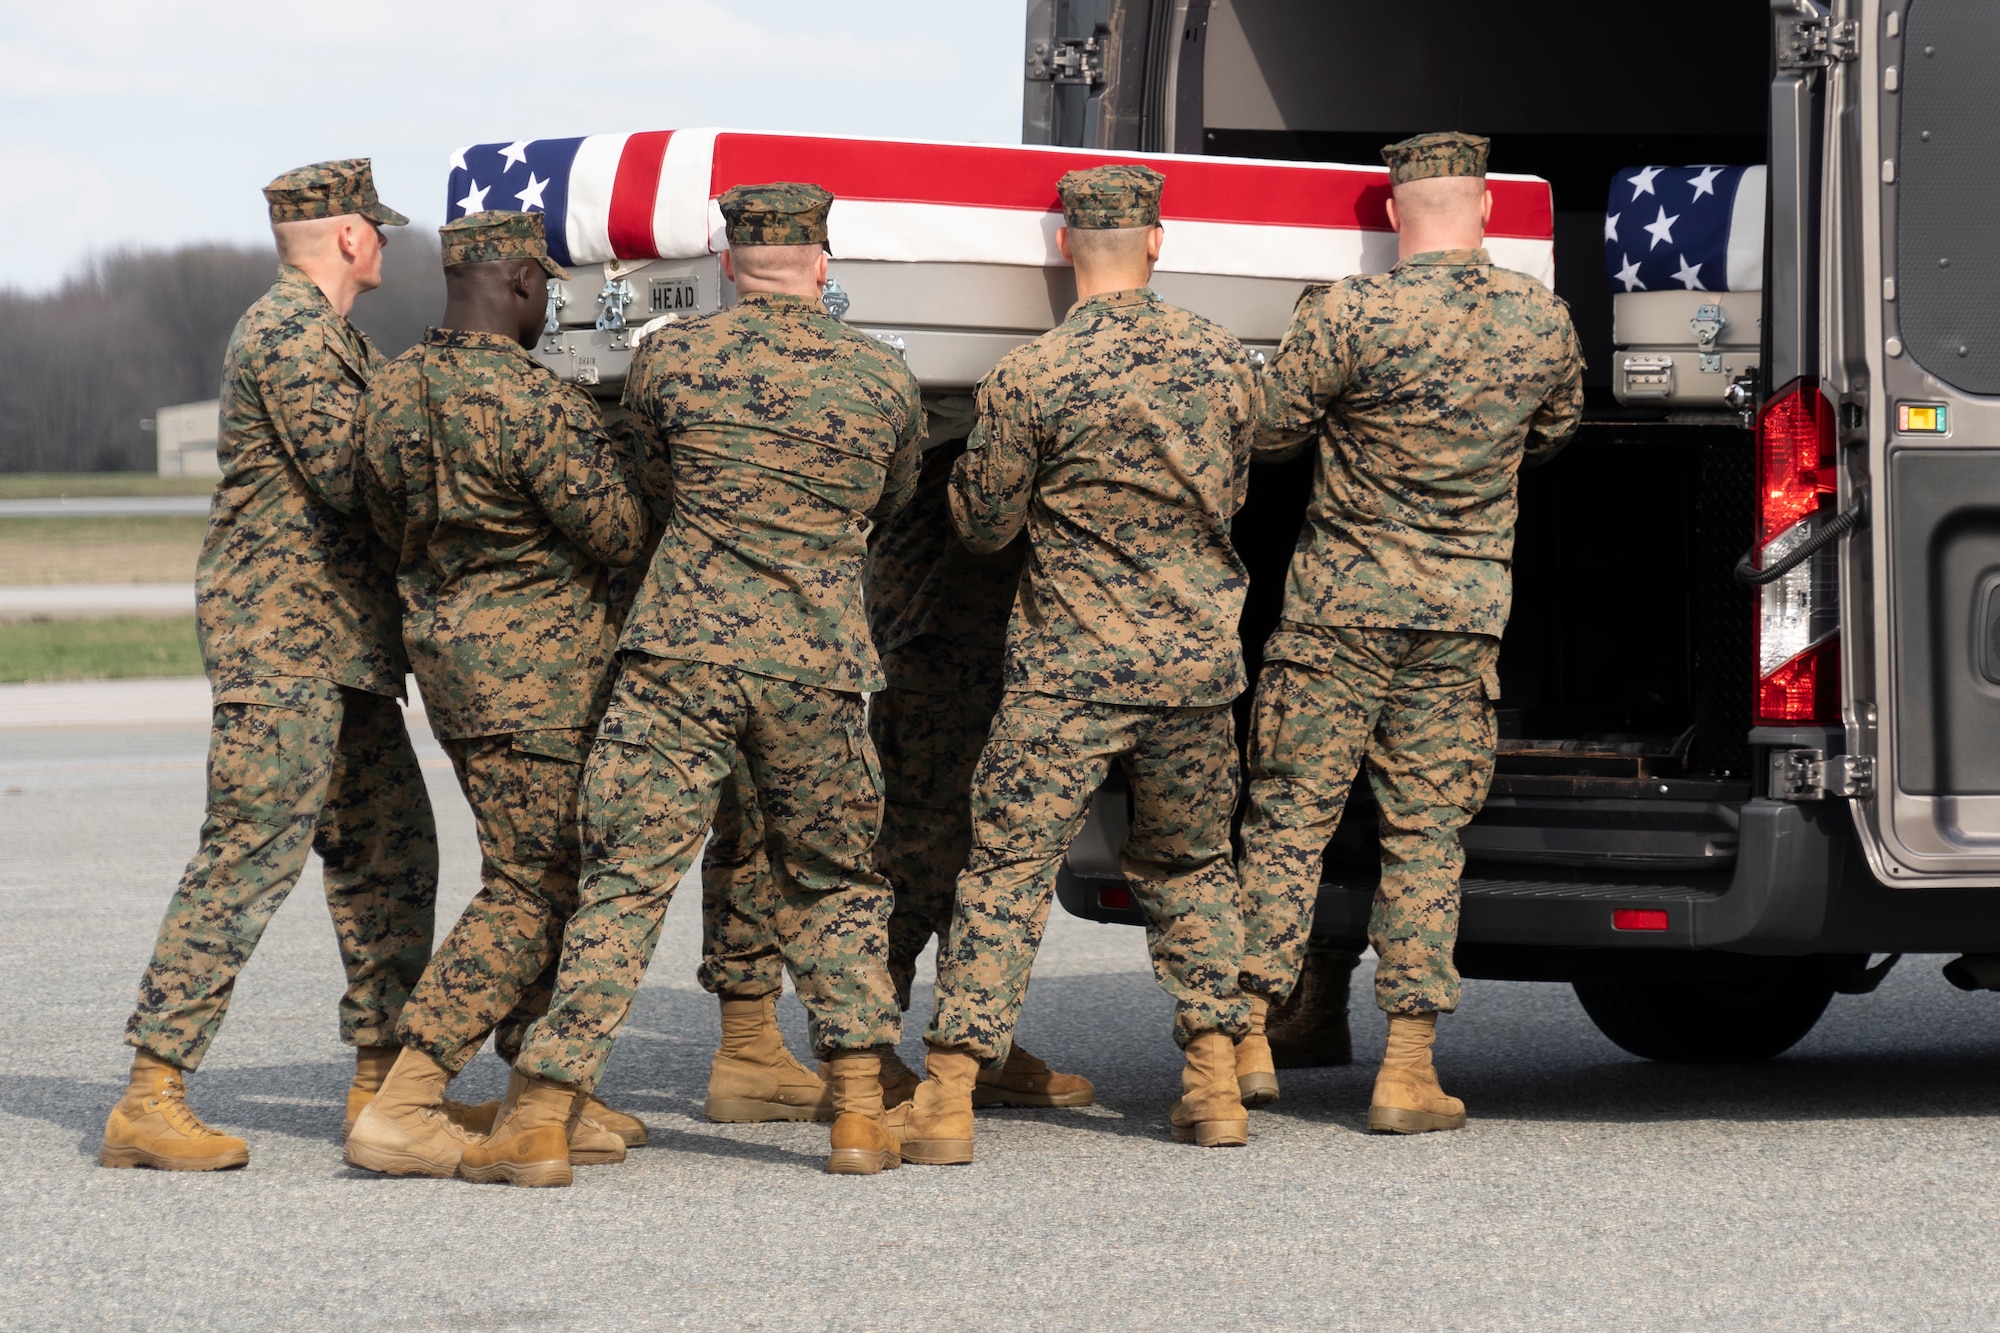 A U.S. Marine Corps carry team transfers the remains of Marine Corps Cpl. Jacob M. Moore of Catlettsburg, Kentucky, at Dover Air Force Base, Delaware, March 25, 2022. Moore was assigned to Marine Medium Tiltrotor Squadron 261, Marine Aircraft Group 26, 2nd Marine Aircraft Wing, Marine Corps Air Station New River, North Carolina. (U.S. Air Force photo by Jason Minto)